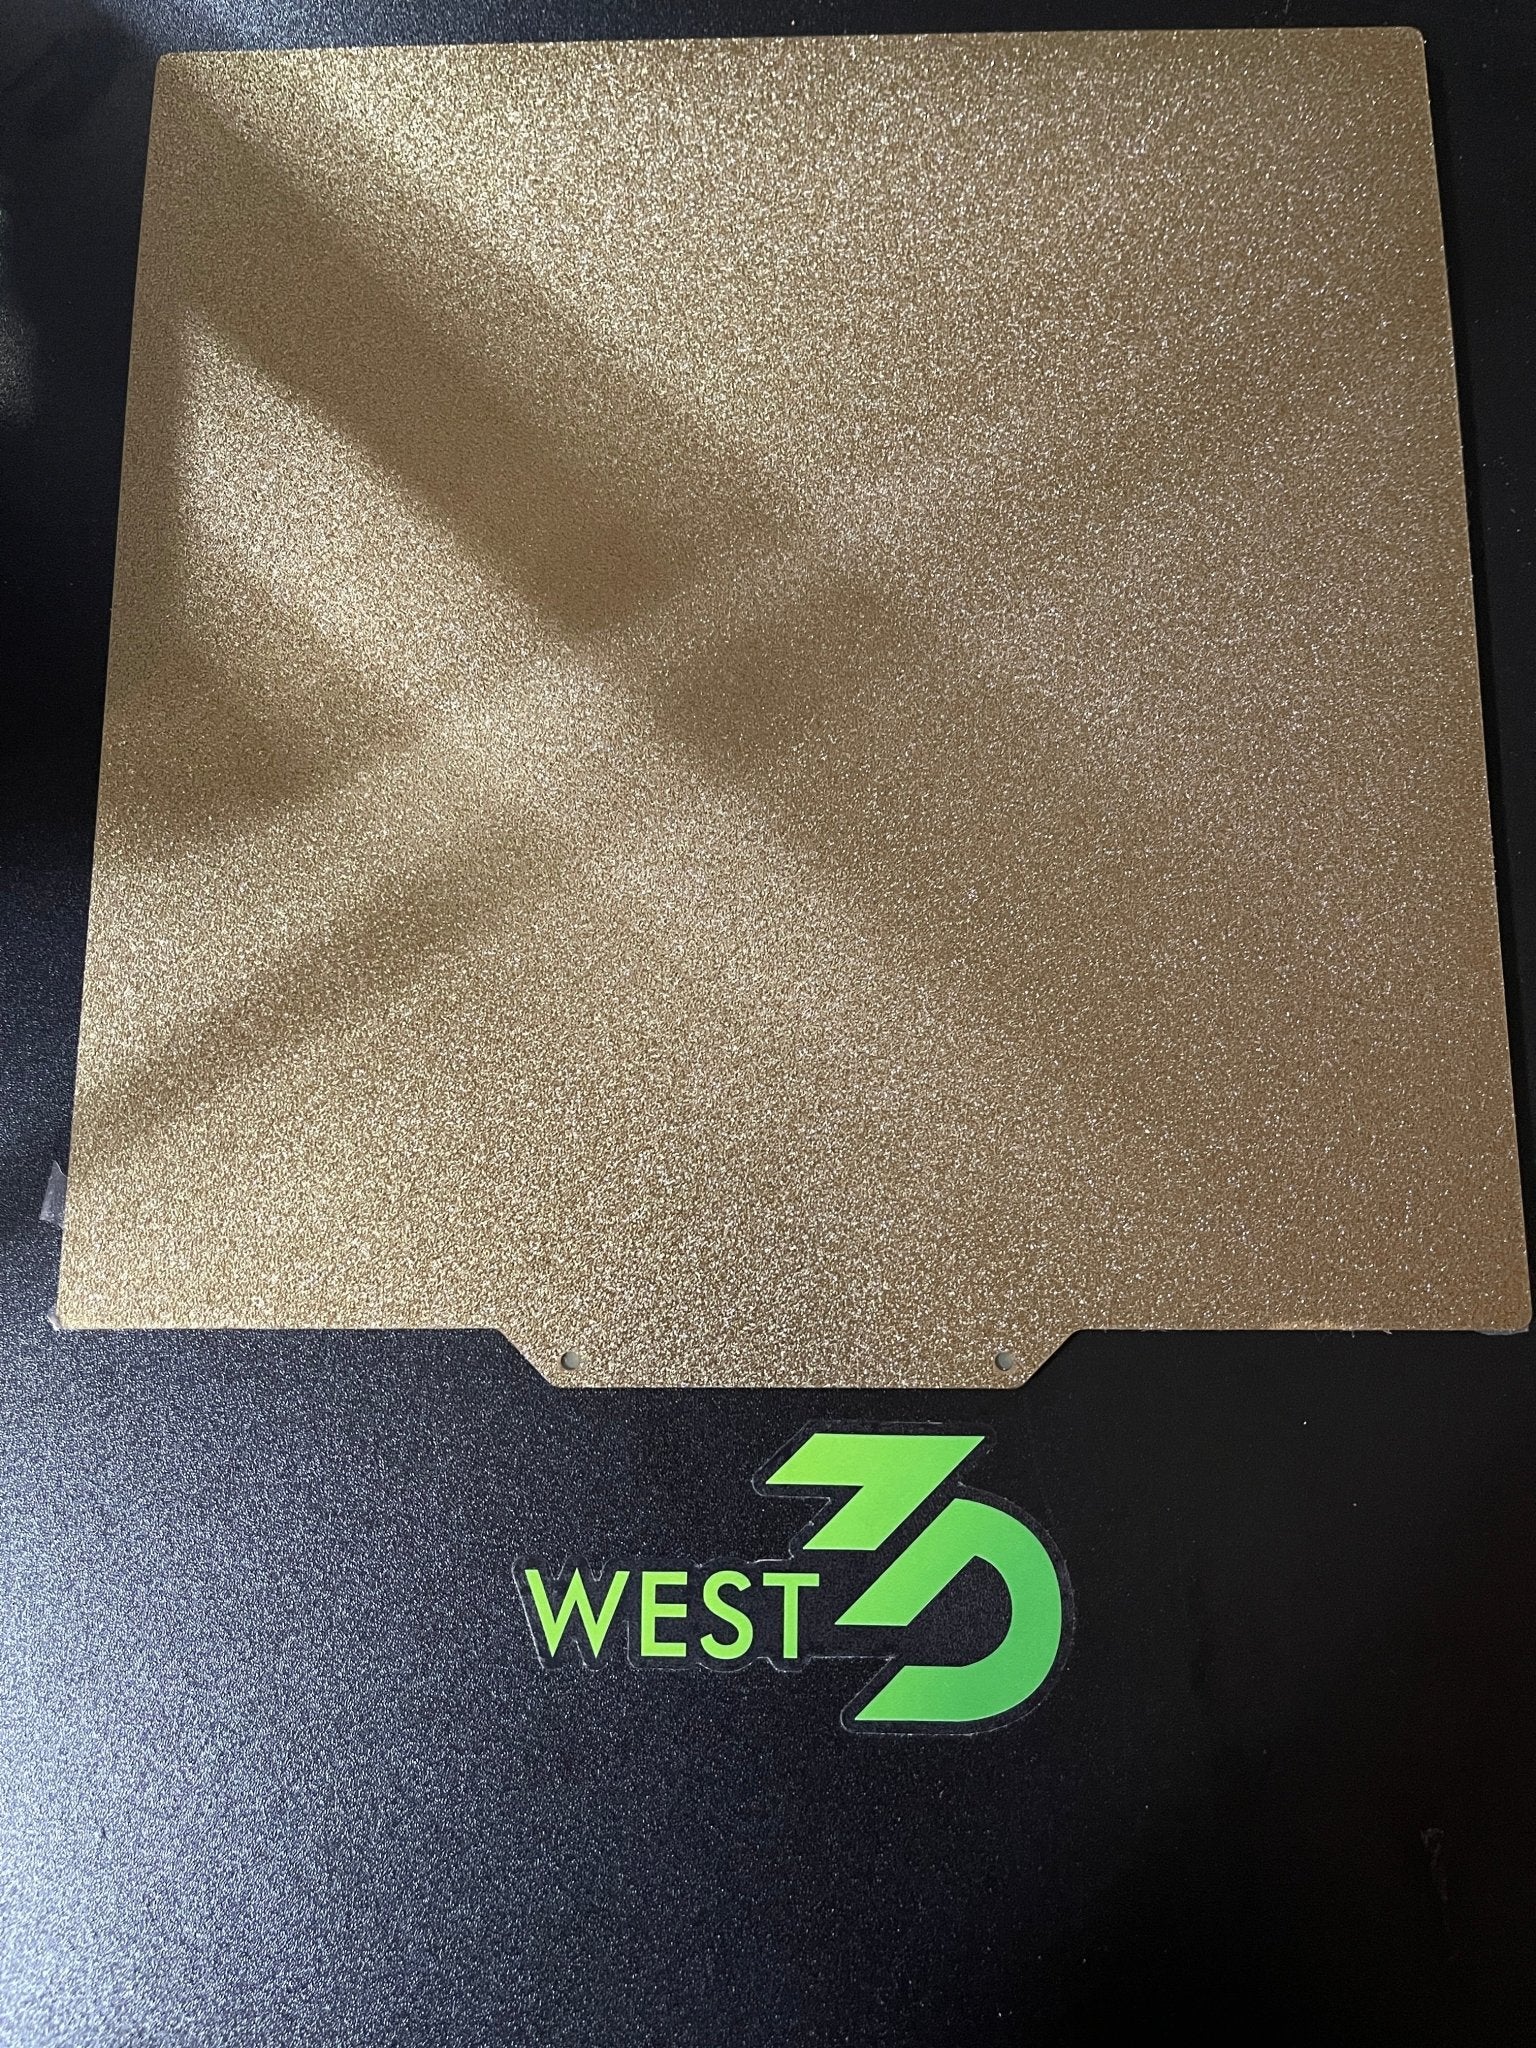 Magnetic Flex Plate Double-Sided and Single-Sided with 3M Magnetic Backing (Energetic & West3D Collab) - West3D Printing - Energetic